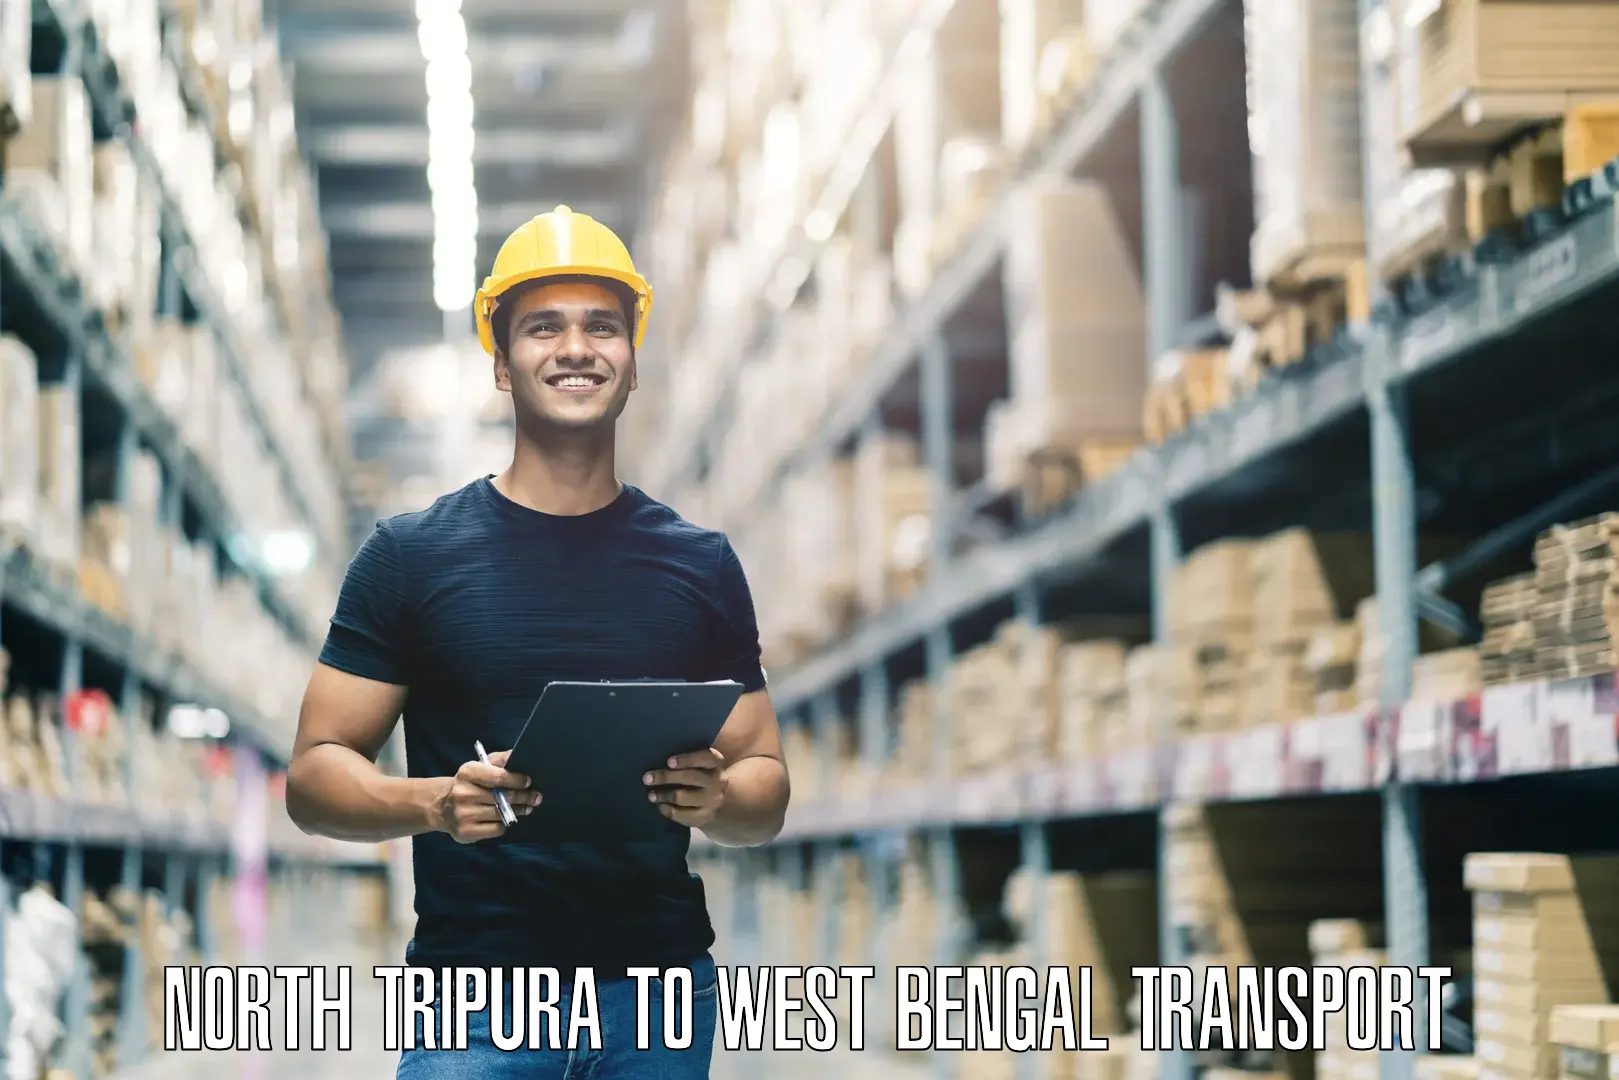 Container transport service North Tripura to West Bengal